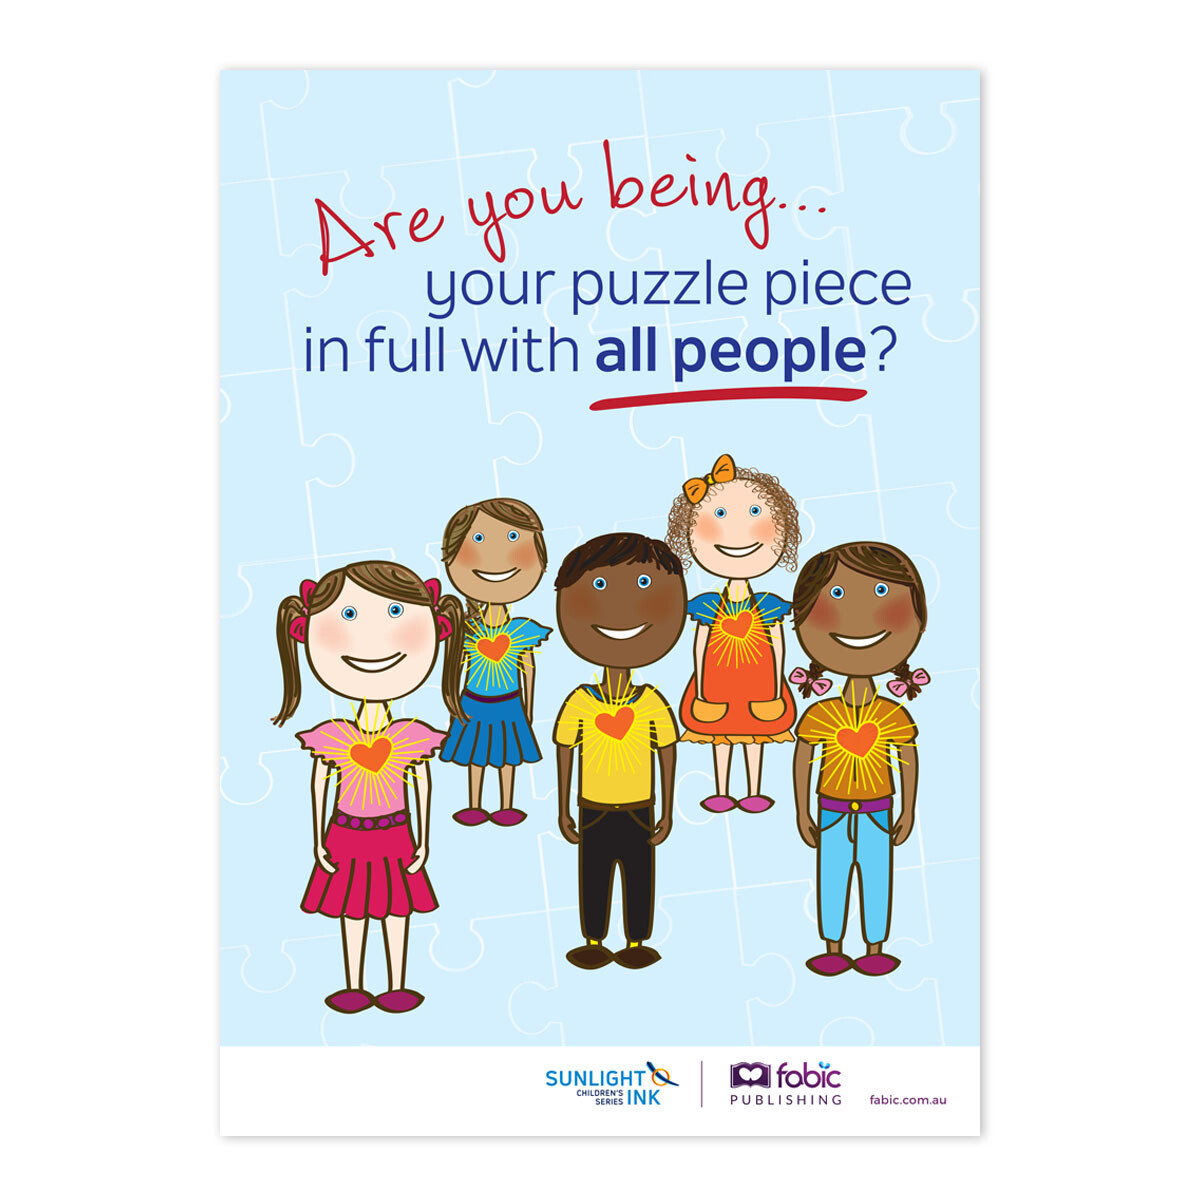 Are you being your puzzle piece with all people? (Poster)